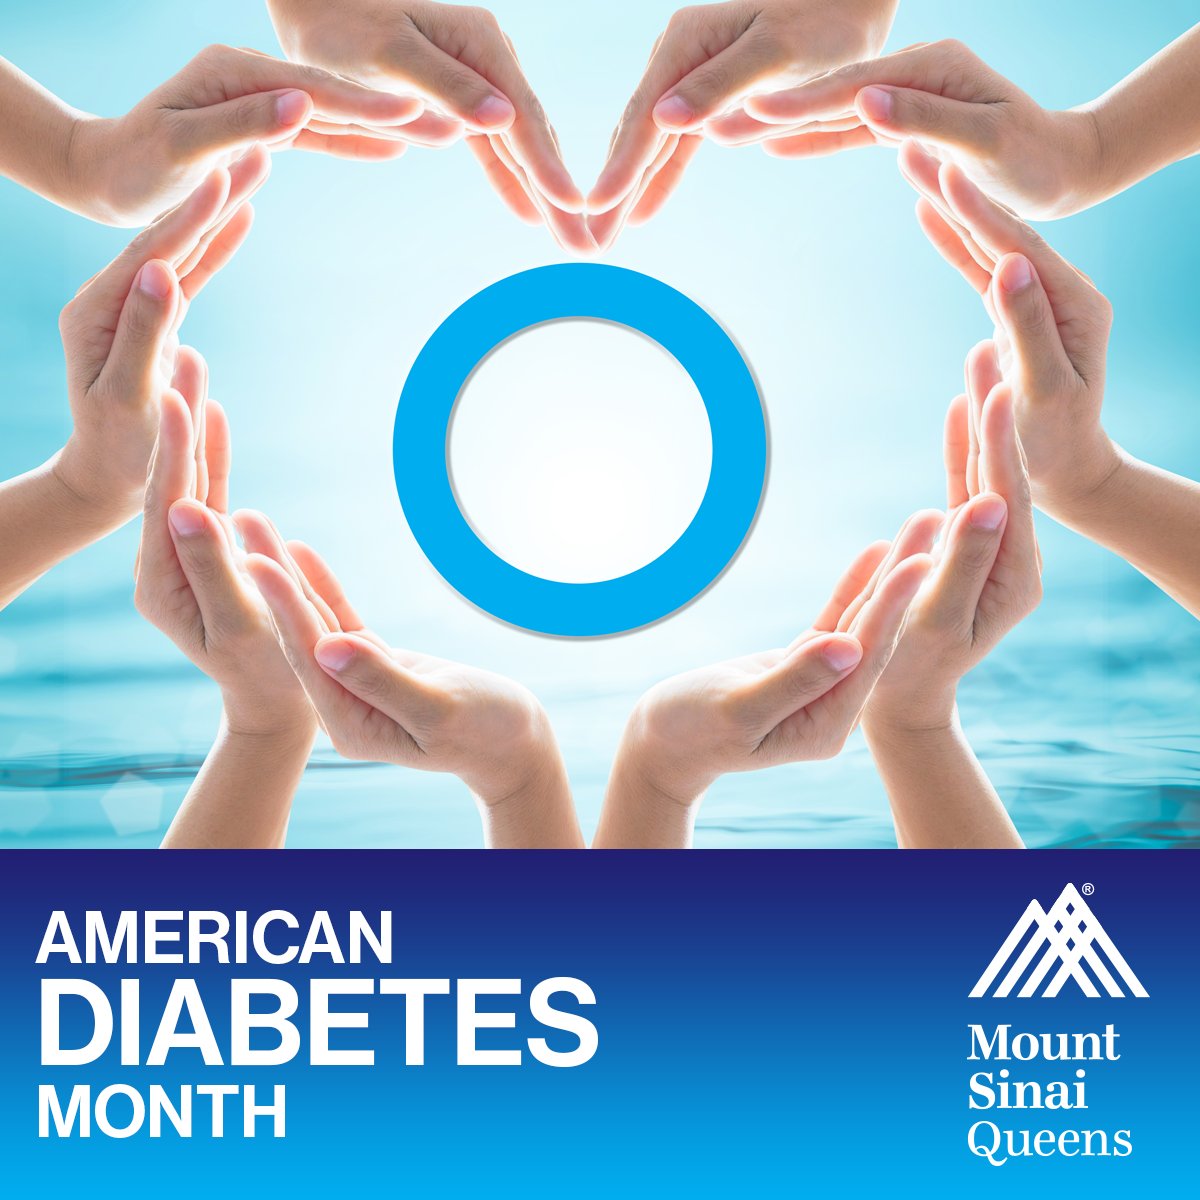 November is American Diabetes Month. Help raise awareness about the risks of living with #diabetes. Now is the time to get educated and monitor your blood glucose levels. bit.ly/3DPYmLH